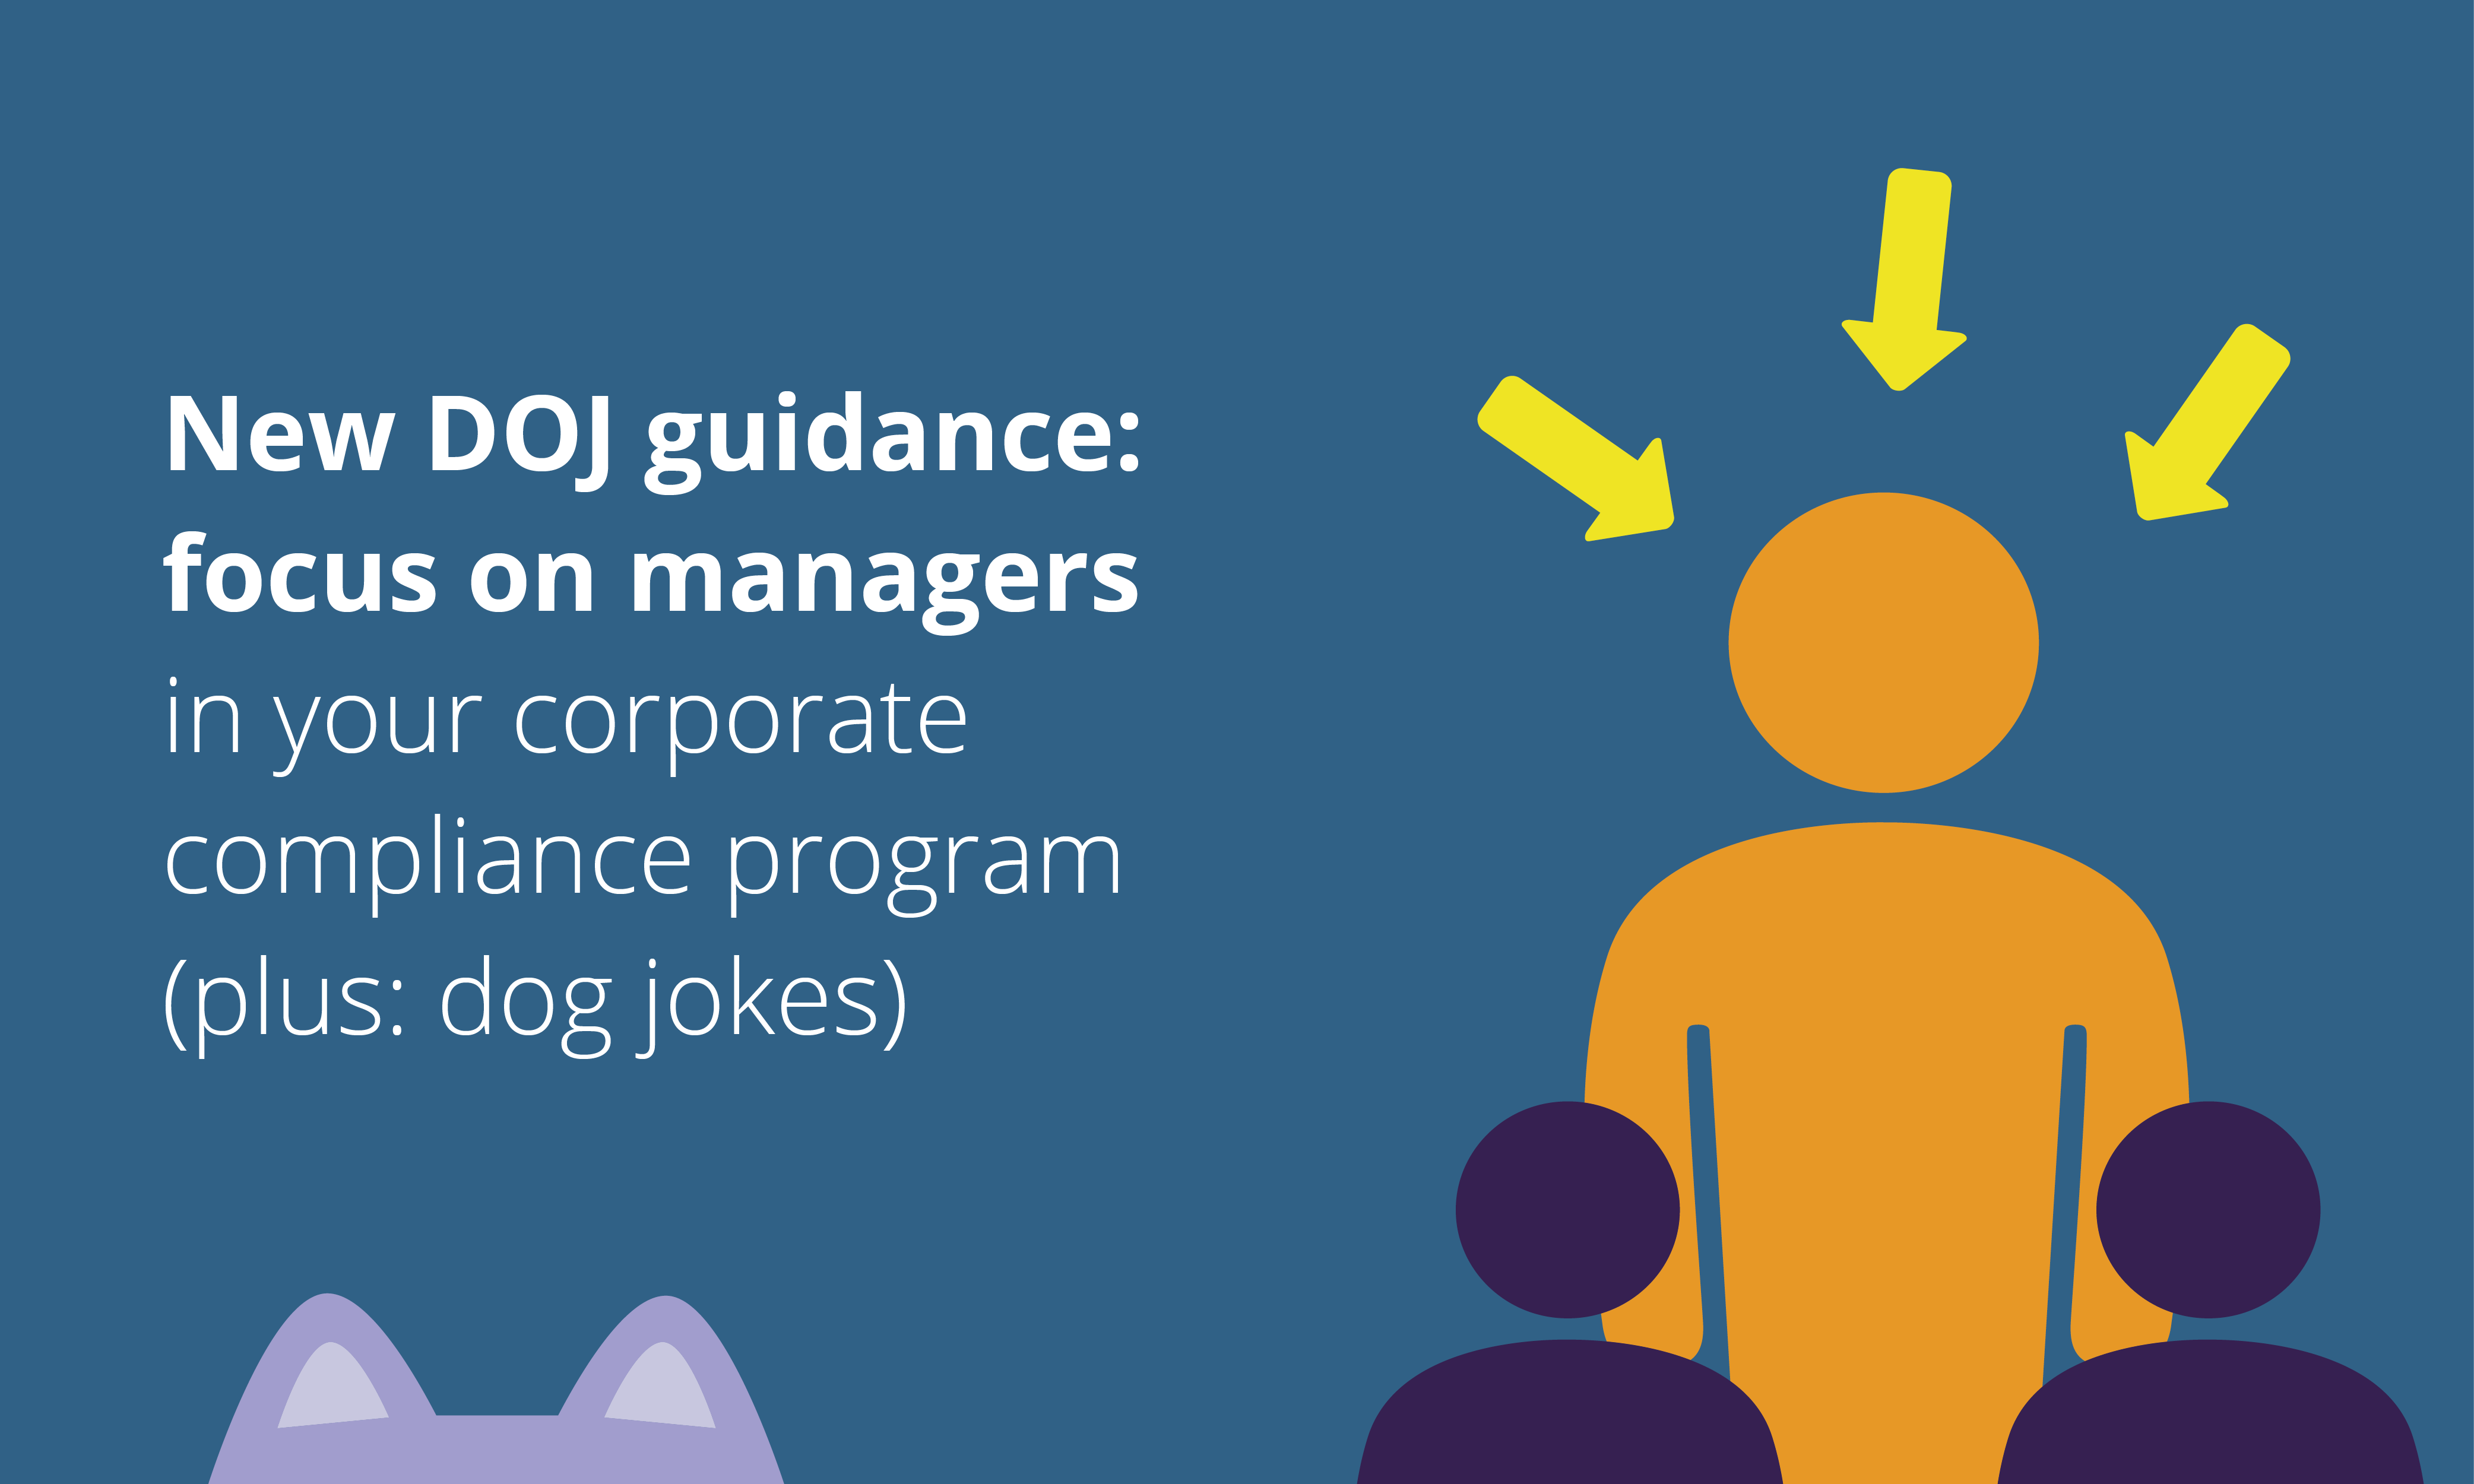 new-doj-guidance-focus-on-managers-in-compliance-plus-dog-jokes